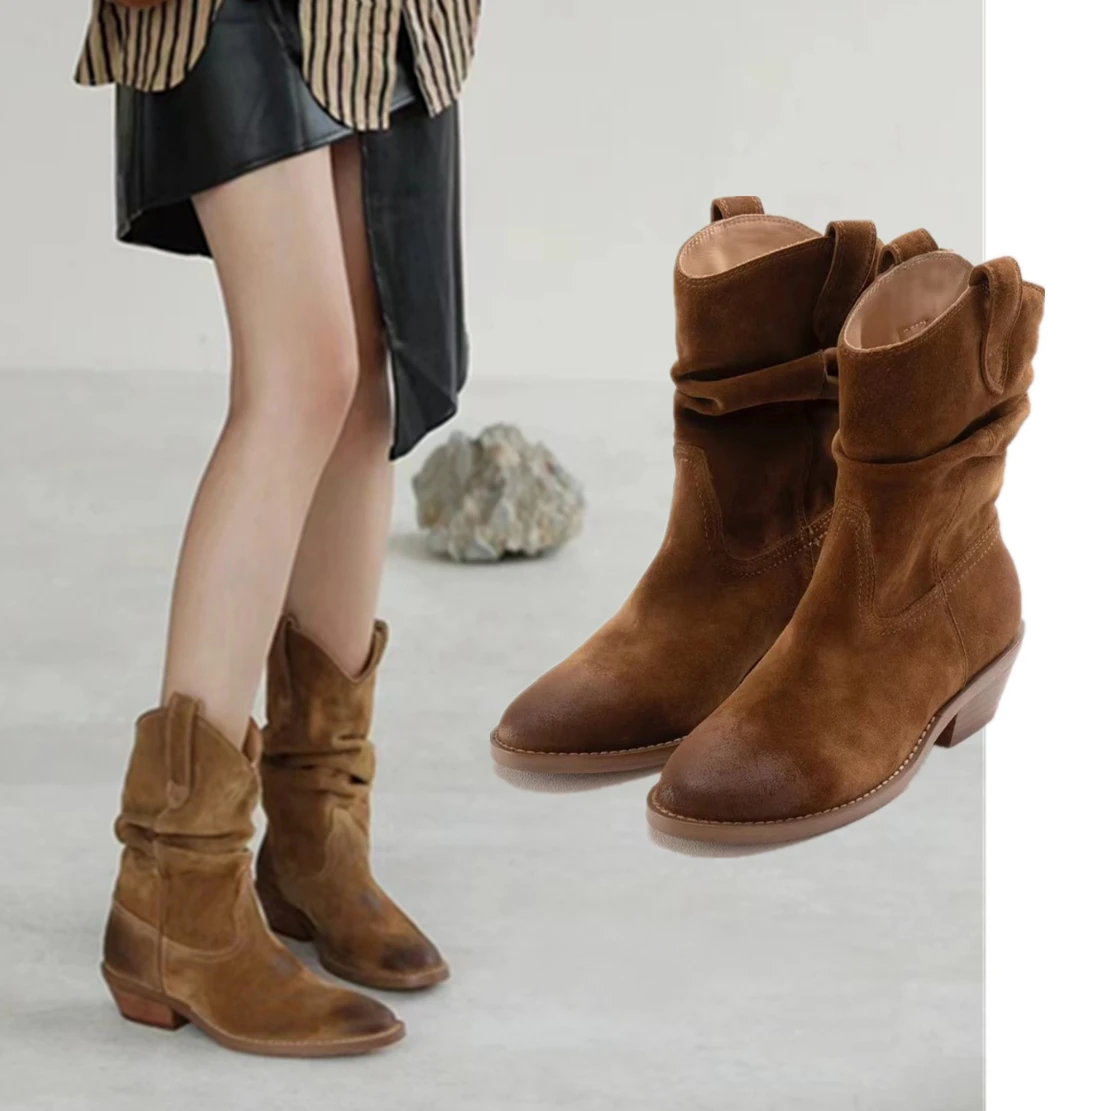 

Dave&Di Western Retro Brushed Cow Suede Knight Boots Women Casual Thick Fashion Heel Boots Shoes Ladies